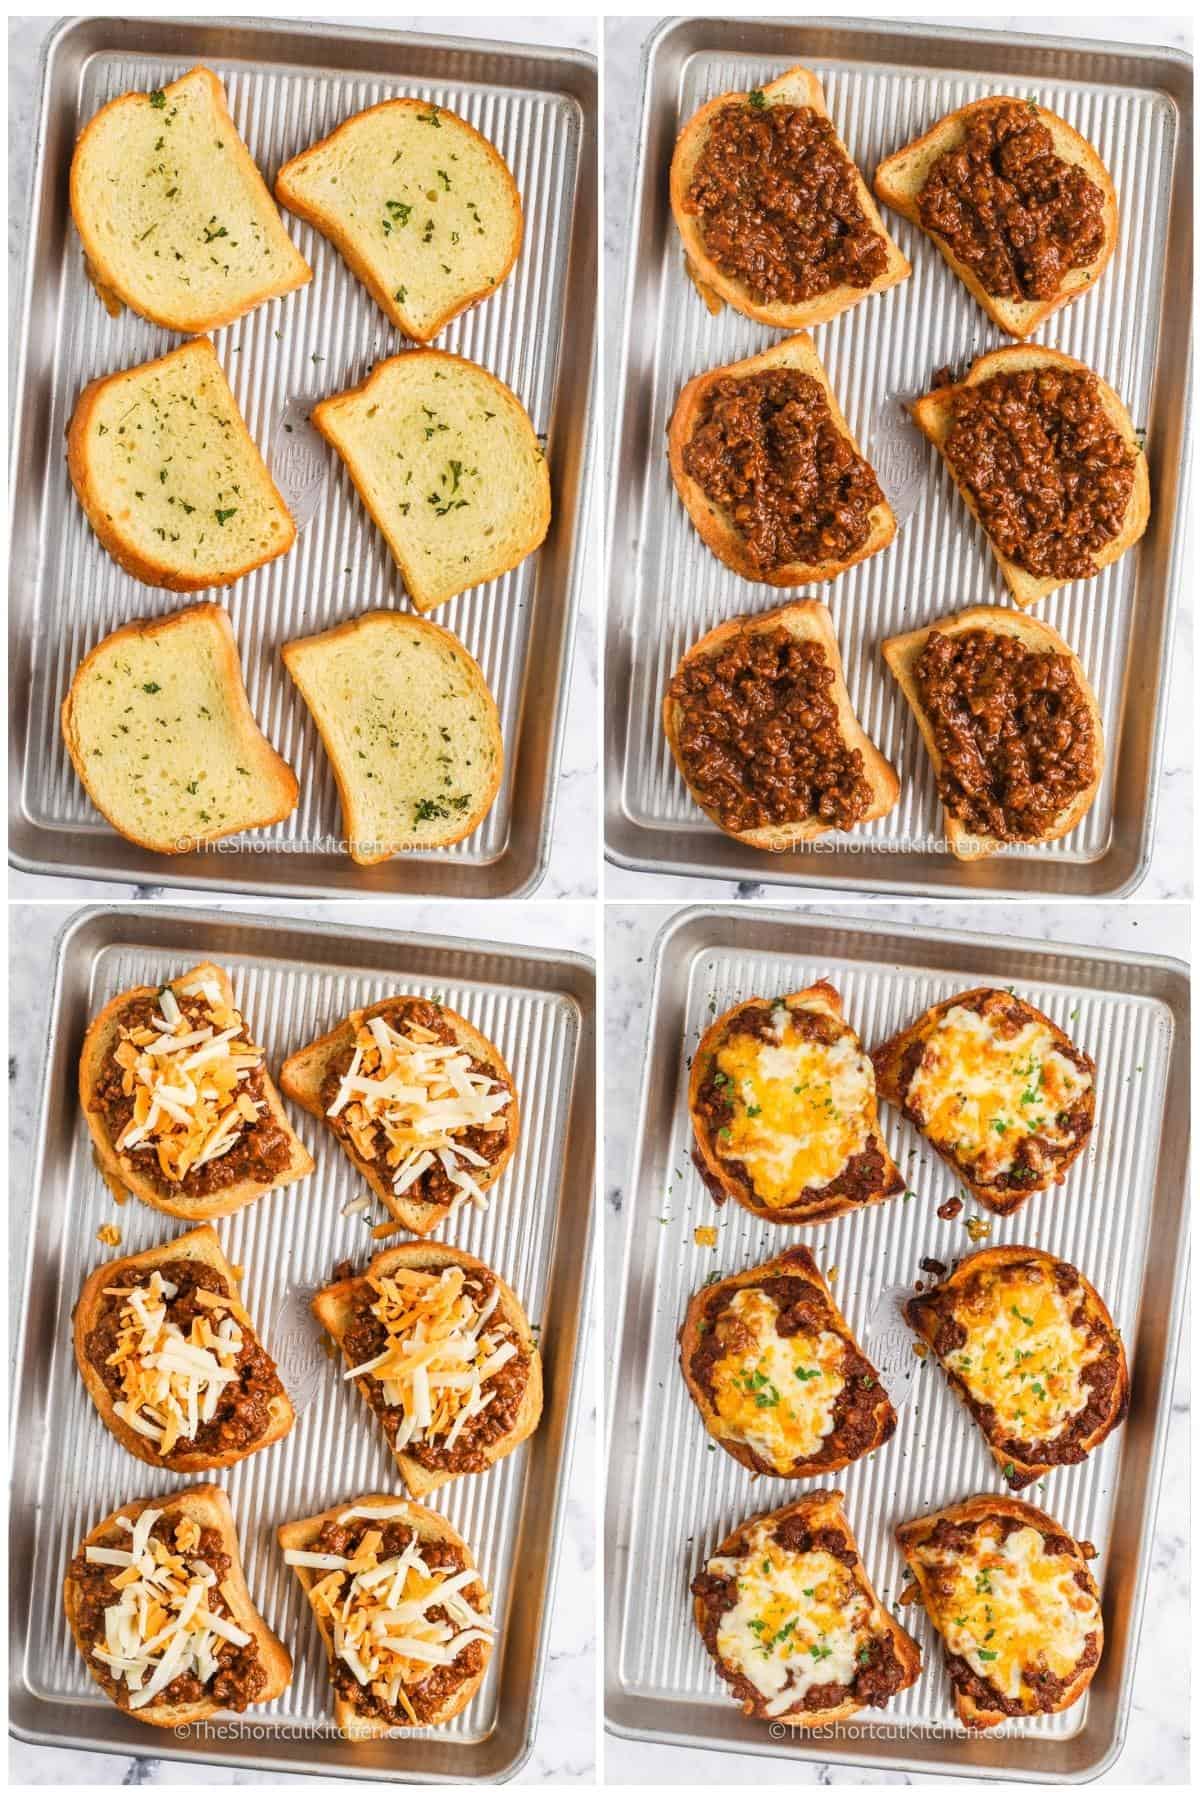 process of adding ingredients together to make Texas Toast Sloppy Joes